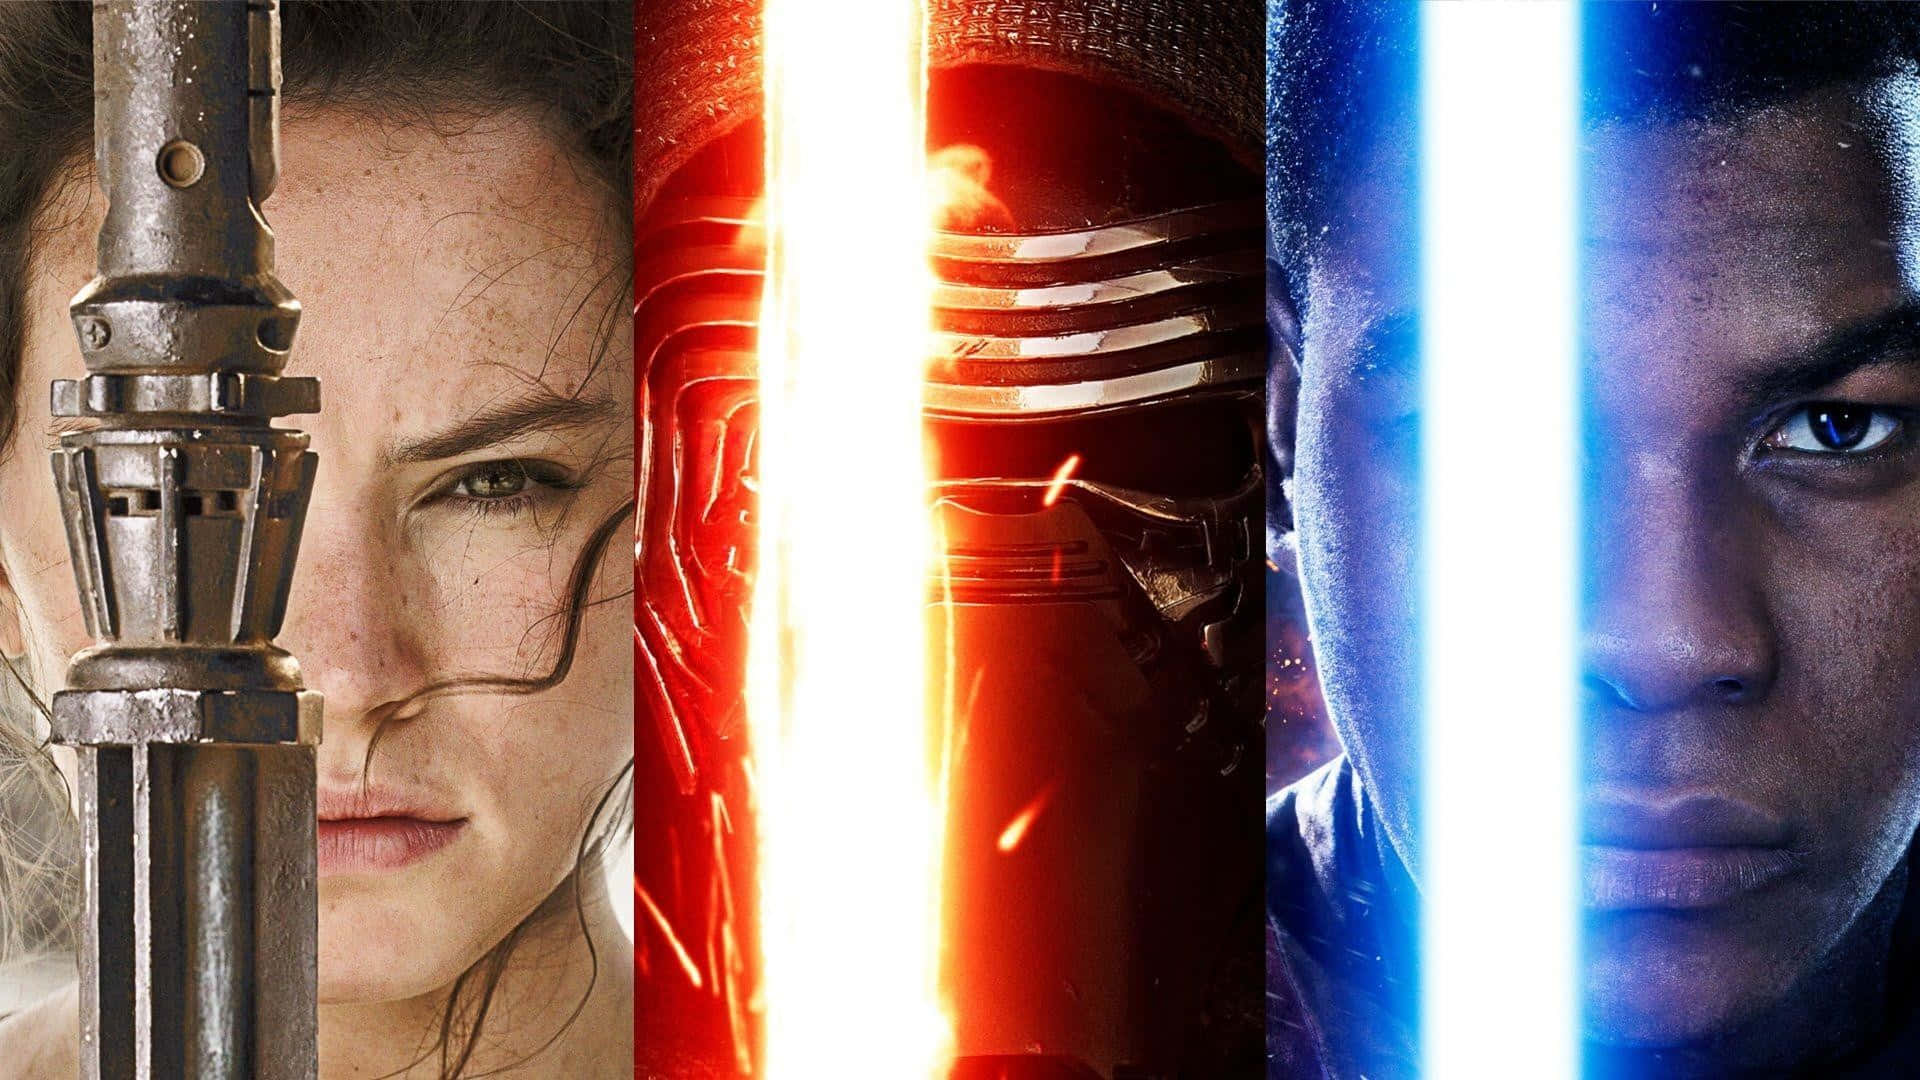 Rey from Star Wars - a blaster and her glowing lightsaber ready Wallpaper